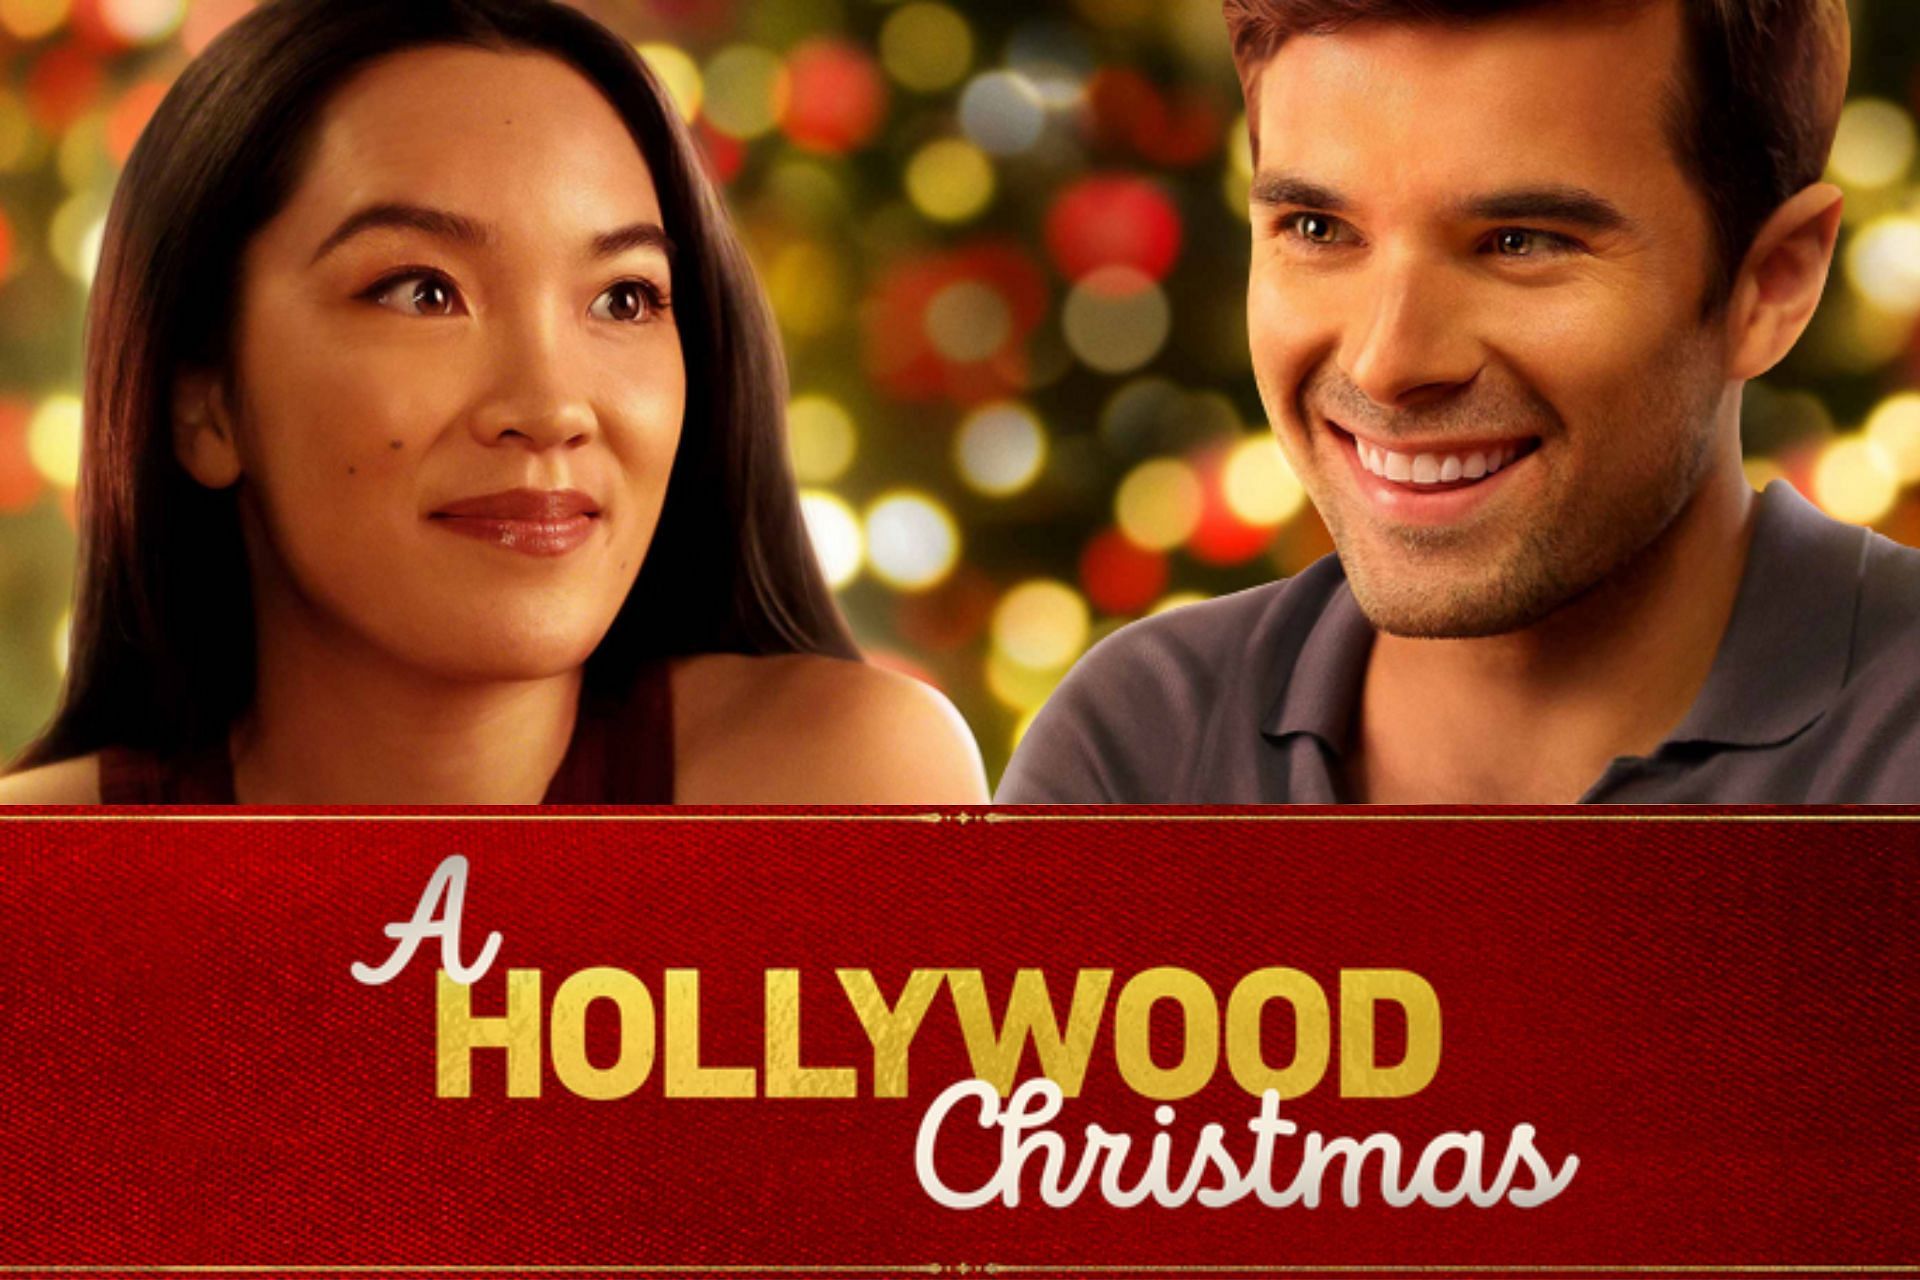 Hollywood Christmas cast list: Jessika Van, Josh Swickard, and others star in HBO Max holiday movie